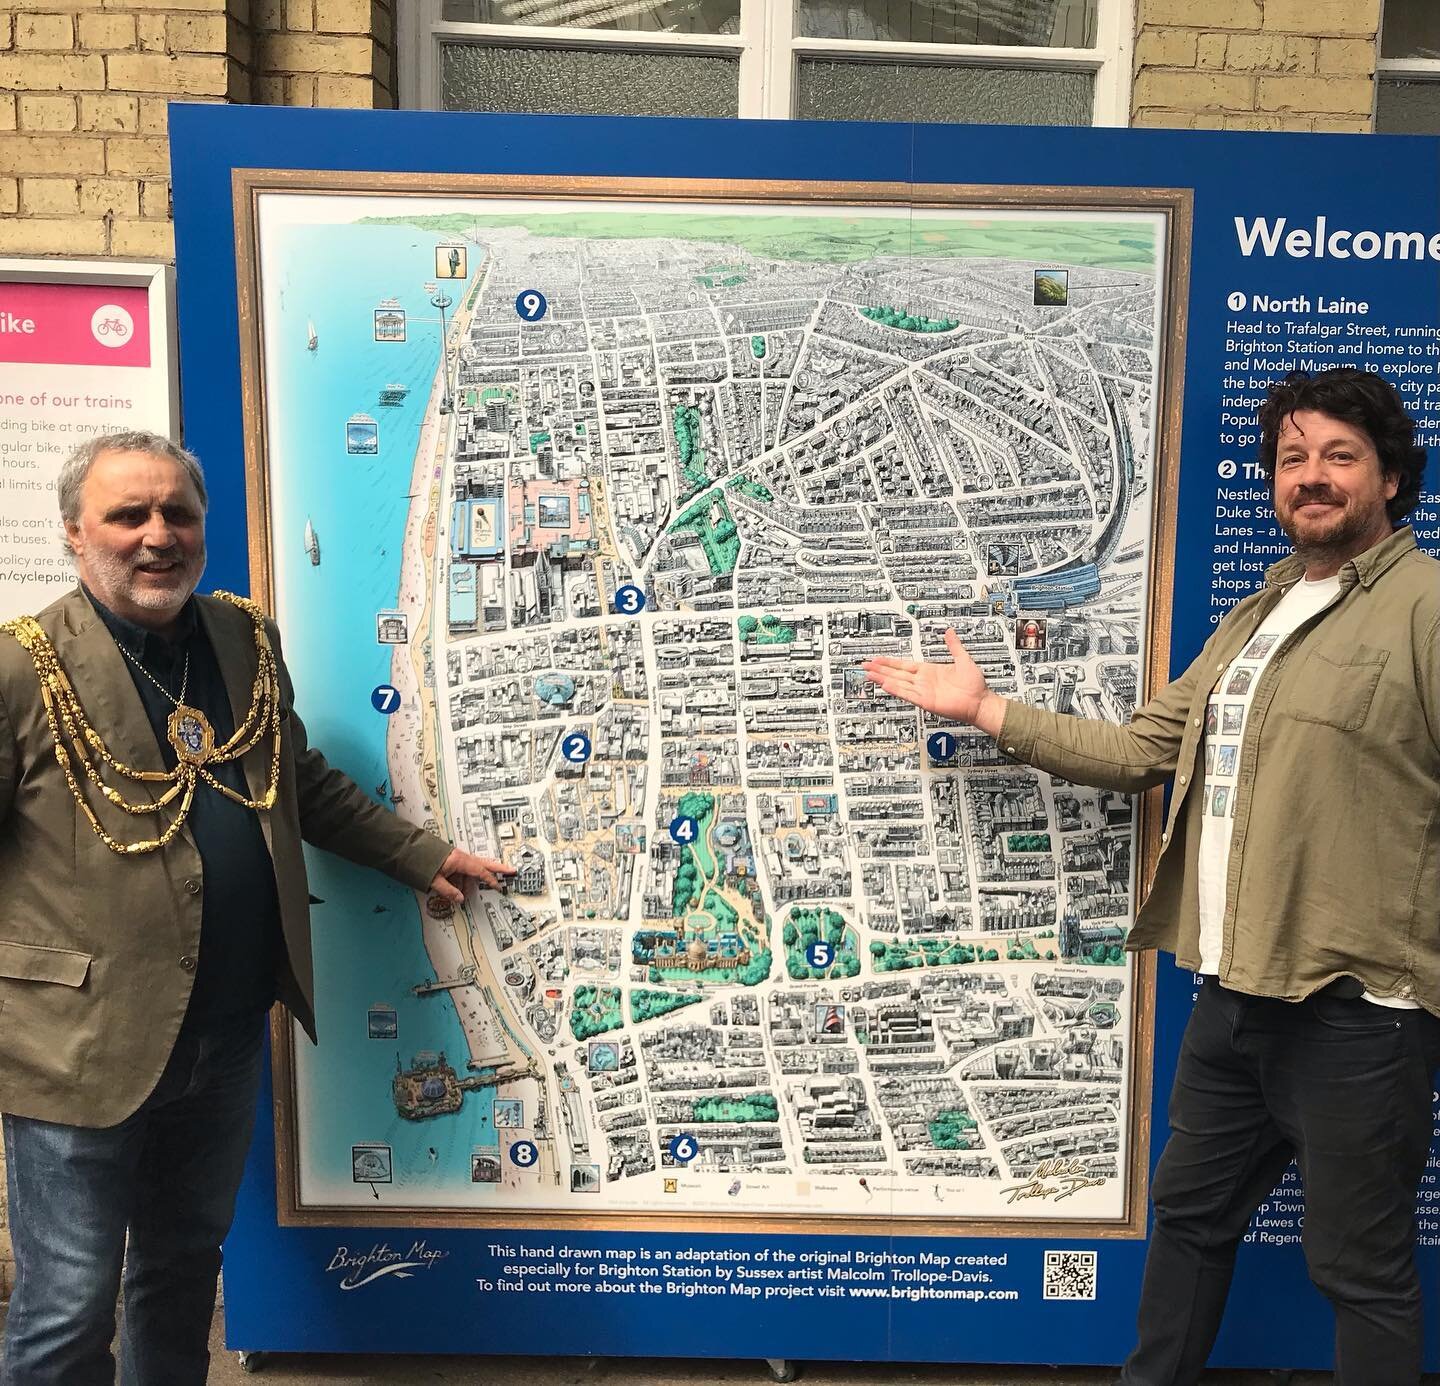 Post of me proudly presenting my #brightonmap #brightonstation to the mayor and Mayoress of Brighton. Cut him out of the previous post ;) @visit.brighton @brightonmuseum @brightonartistsnetwork @brightonargus #sussex #sussexart #visitbrighton #handdr